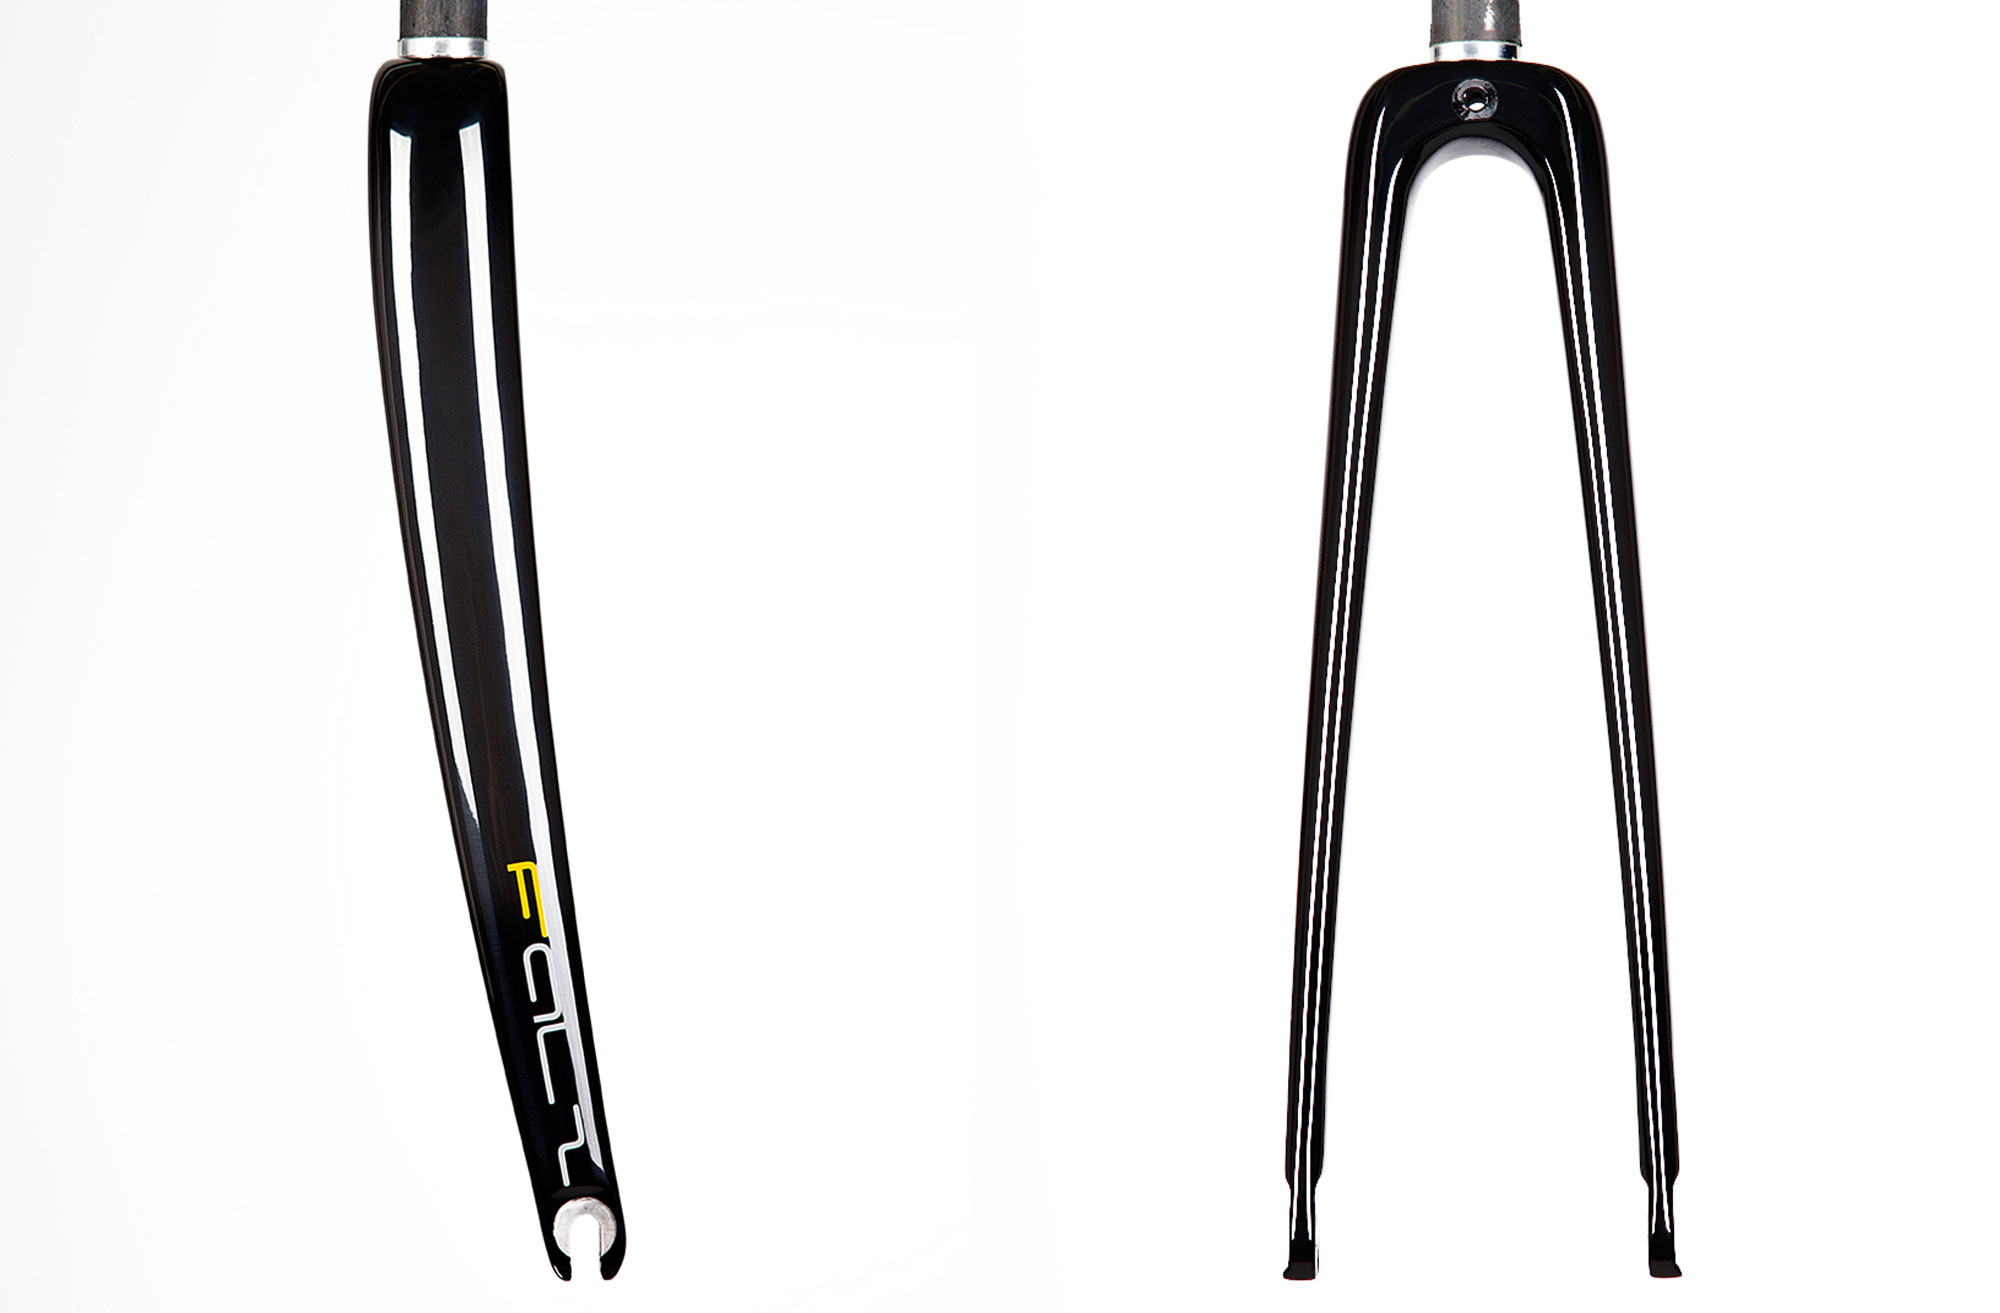 Pegoretti Falz fork, front and side